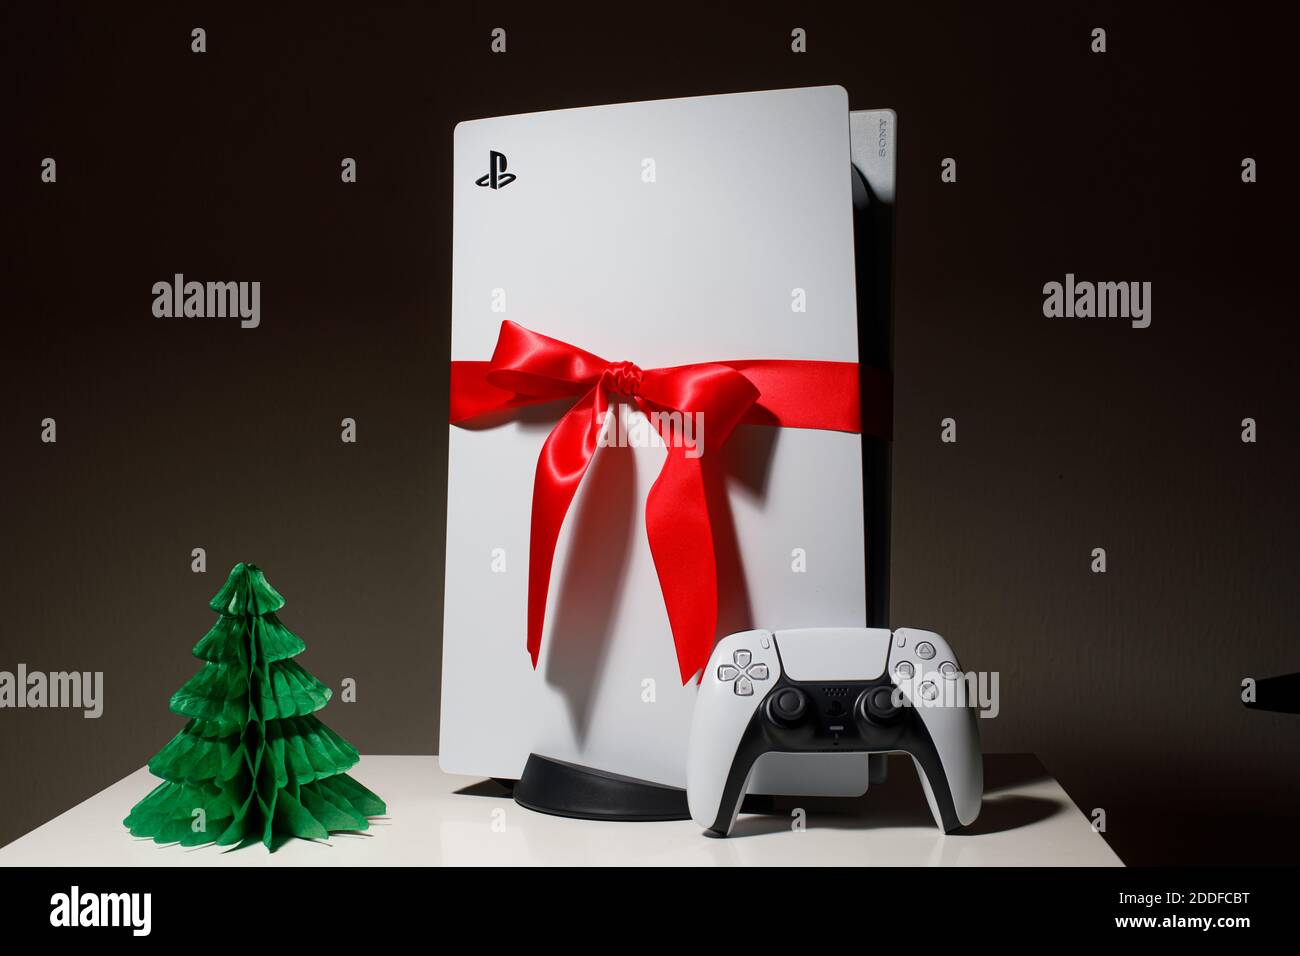 Sony PlayStation 5 game console on black background. Gift edition with red ribbon black friday and Christmas deal Stock Photo